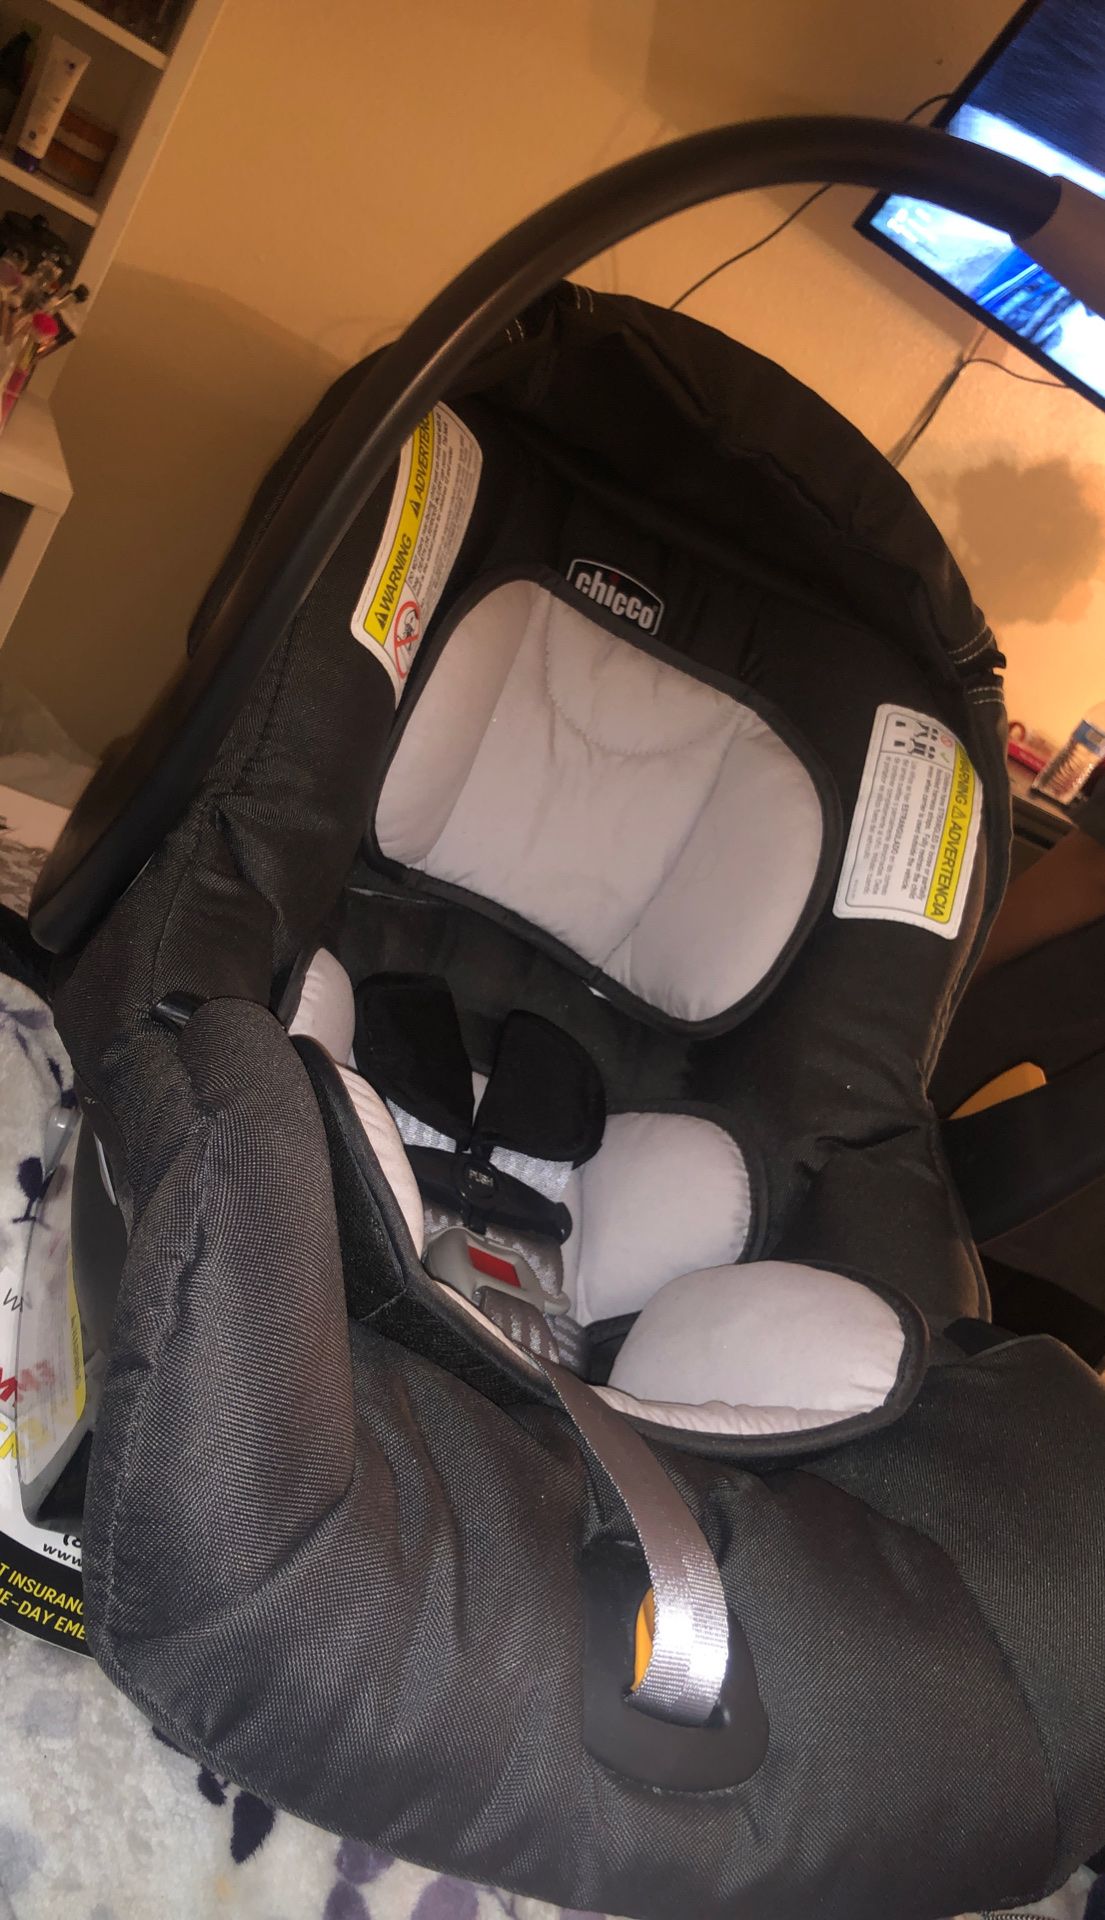 chicco brand car seat